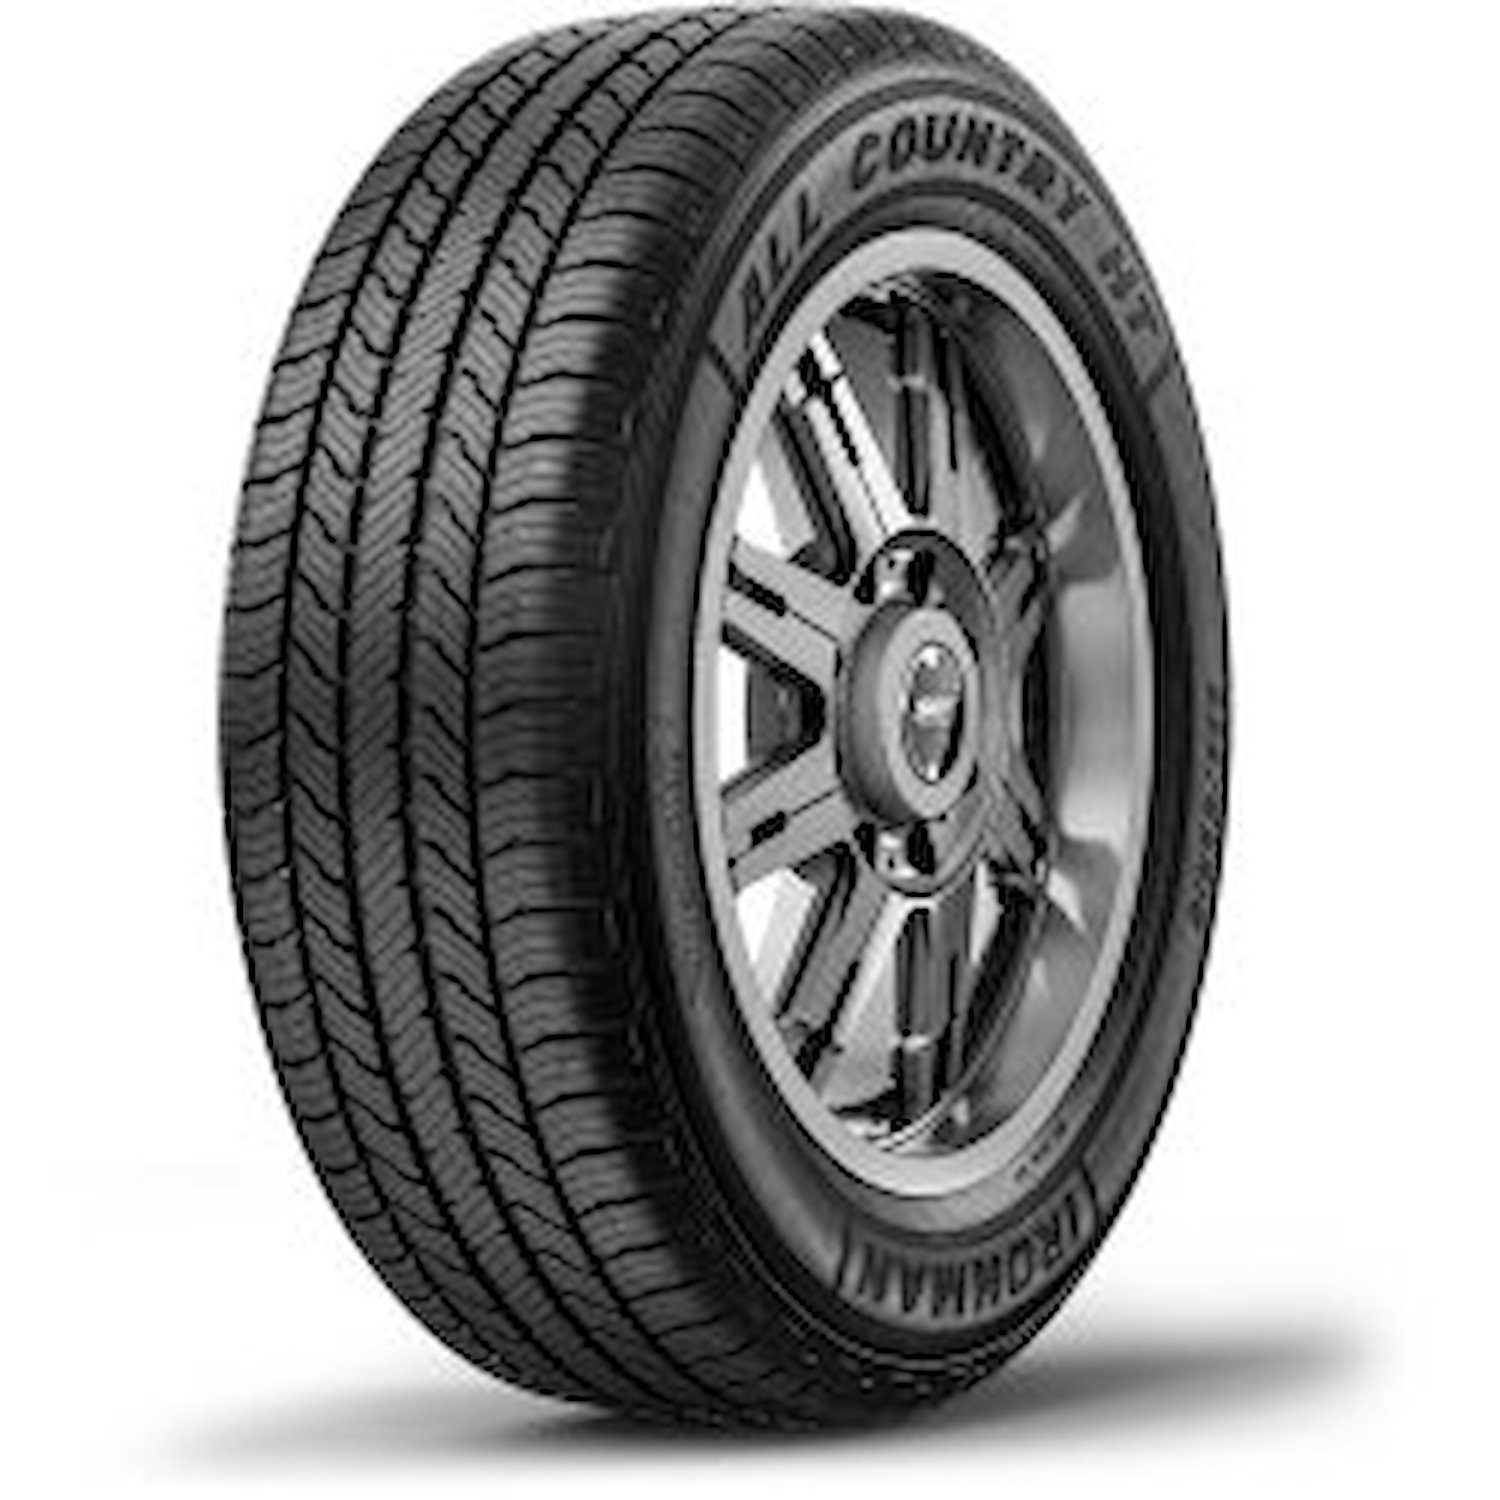 03061 All Country HT Tire, 245/70R16, 107T